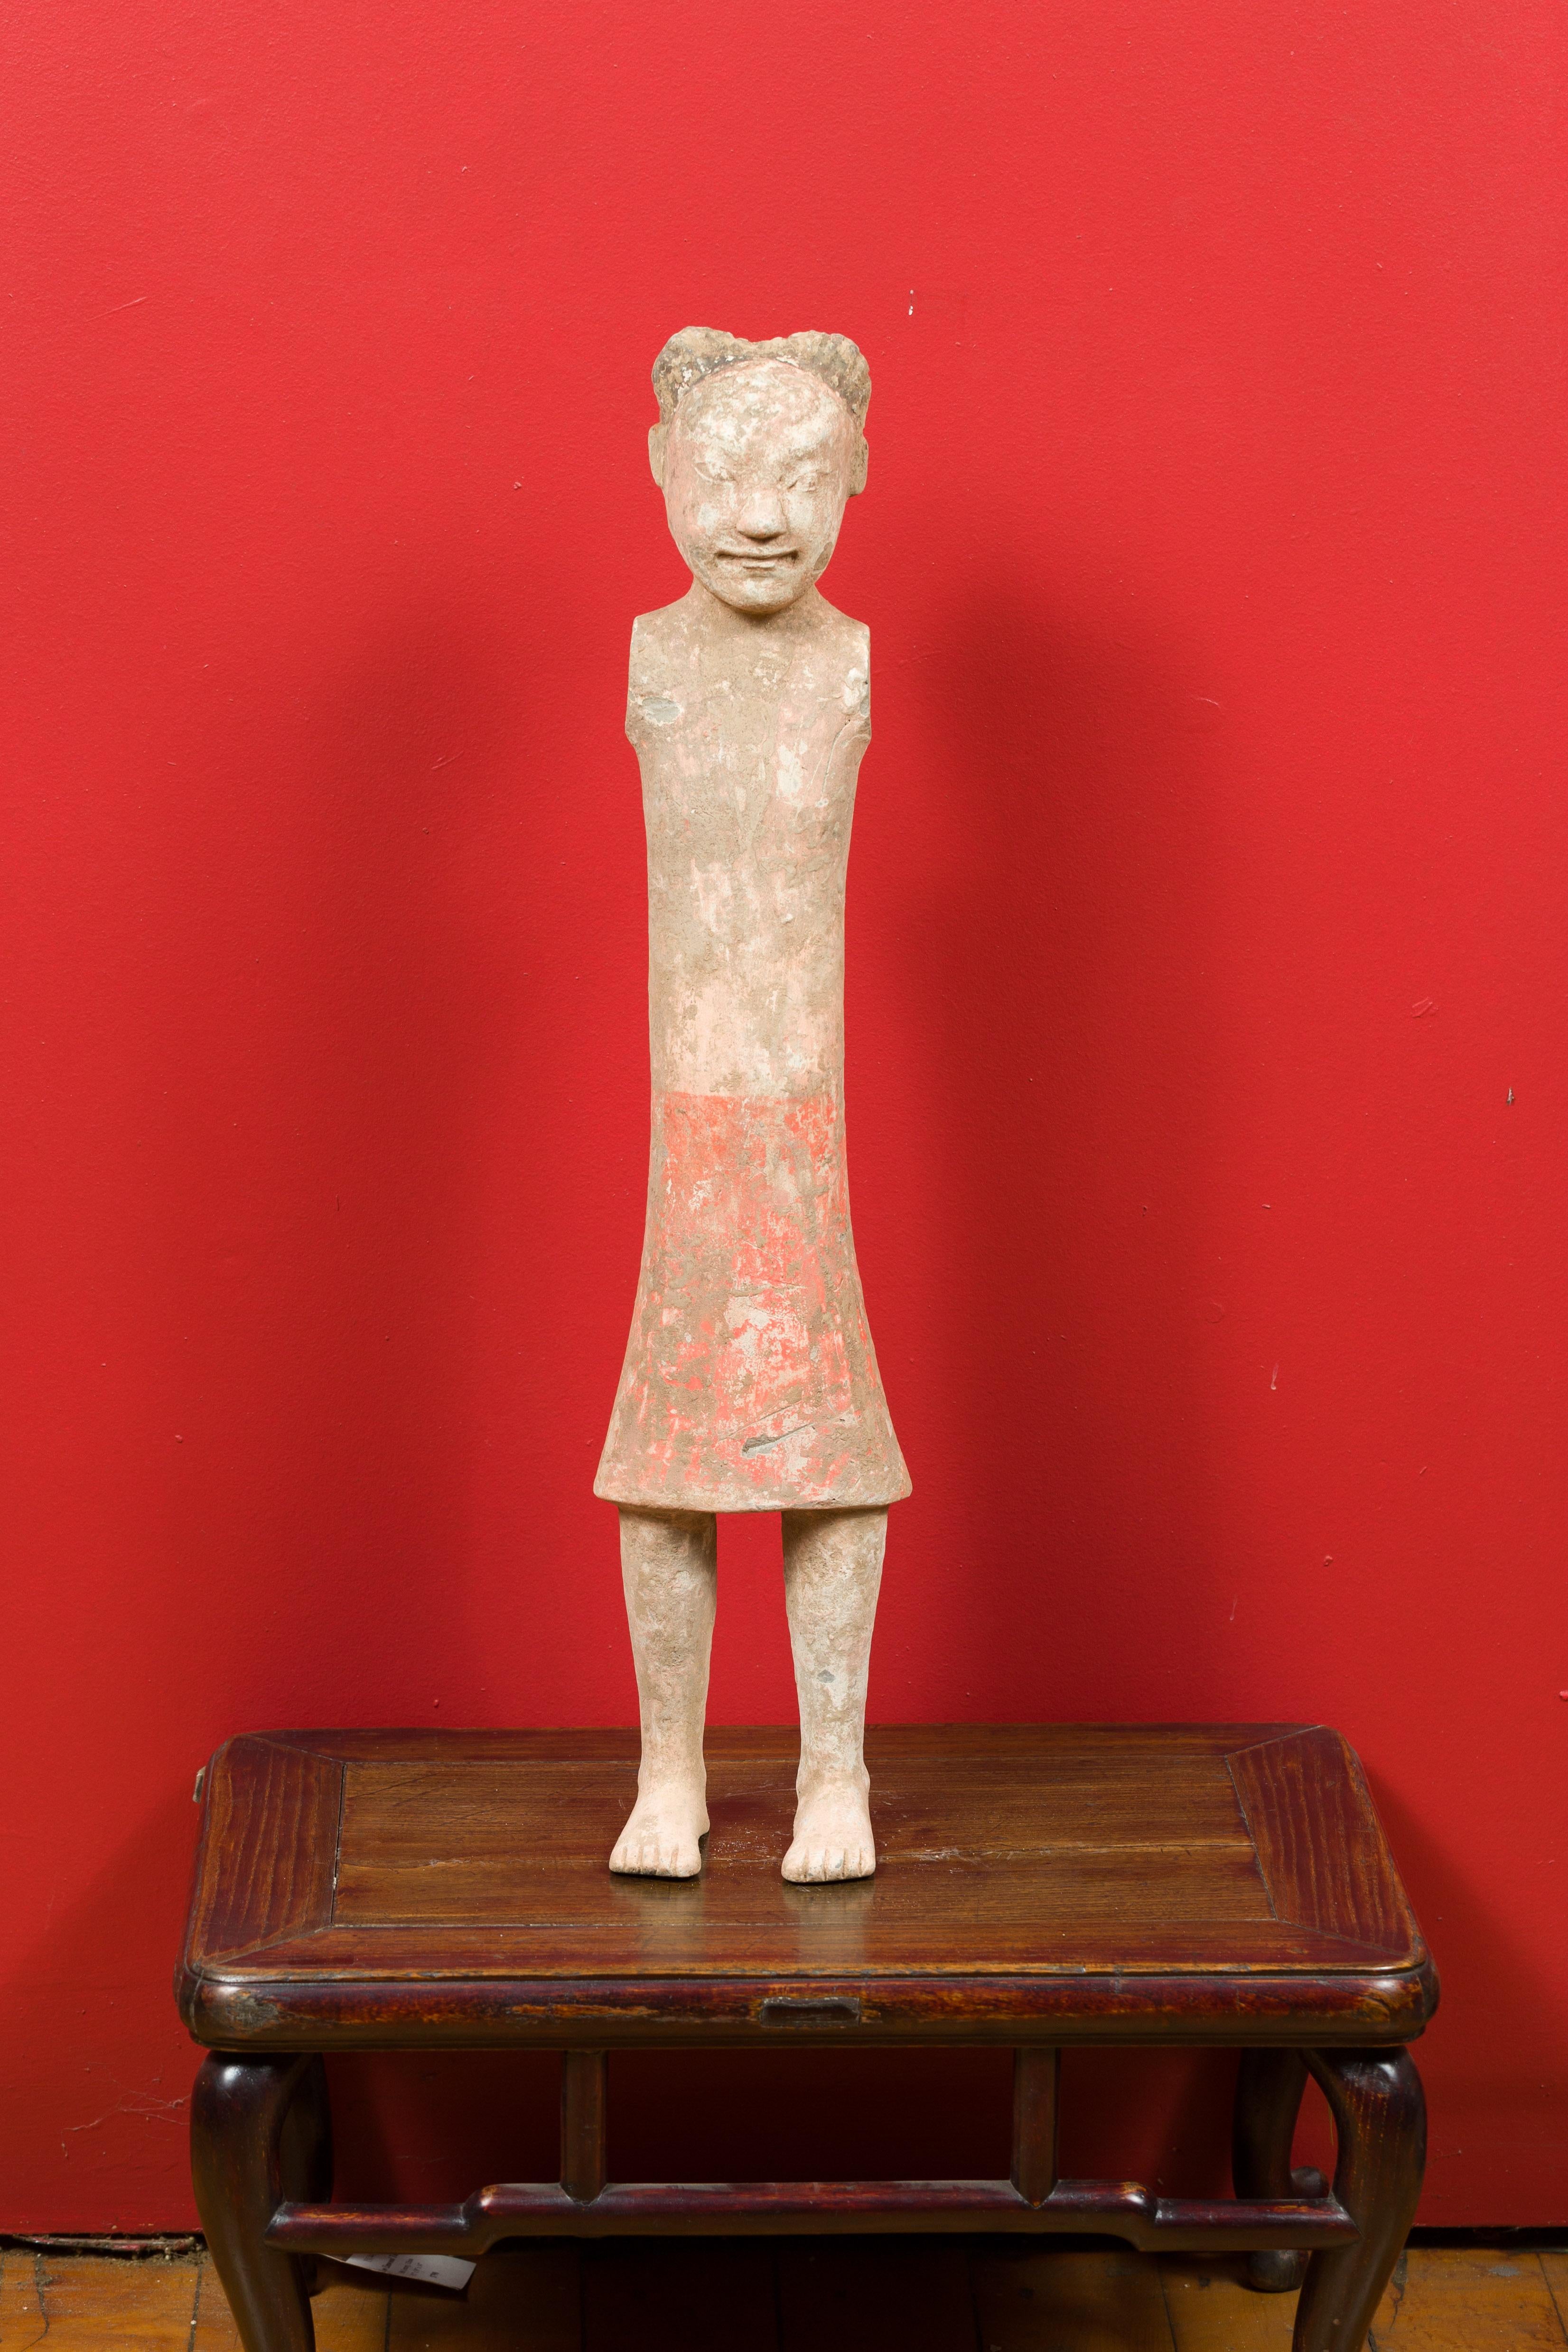 Hand-Crafted Chinese 206 BC-24 AD Western Han Dynasty Figurine with Original Polychromy